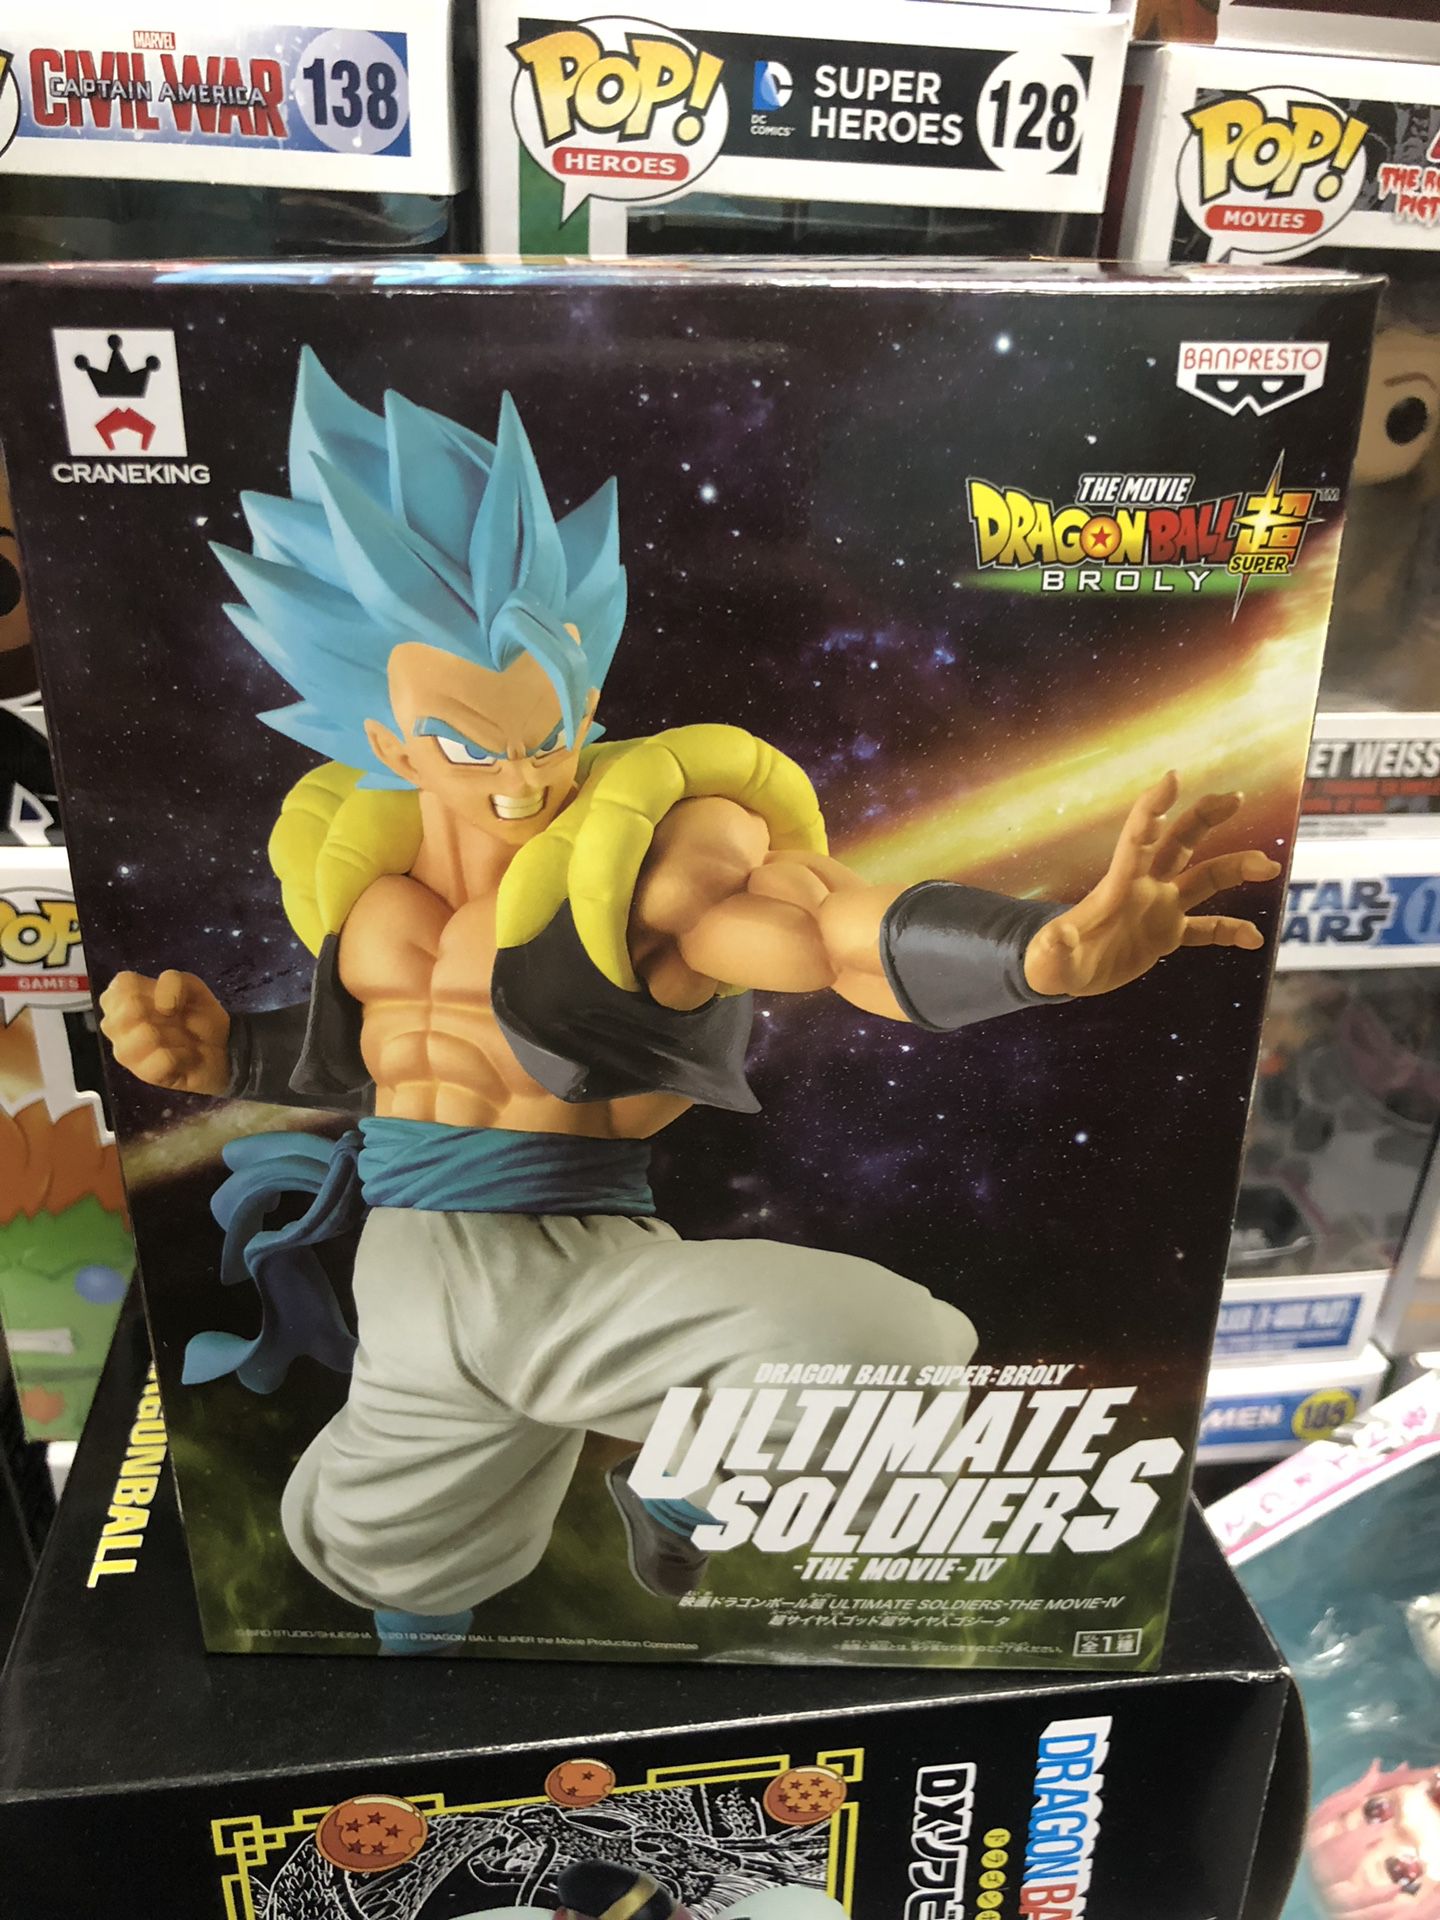 ULTIMATE SOLDIER - BROLY - DRAGON BALL SUPER MOVIE